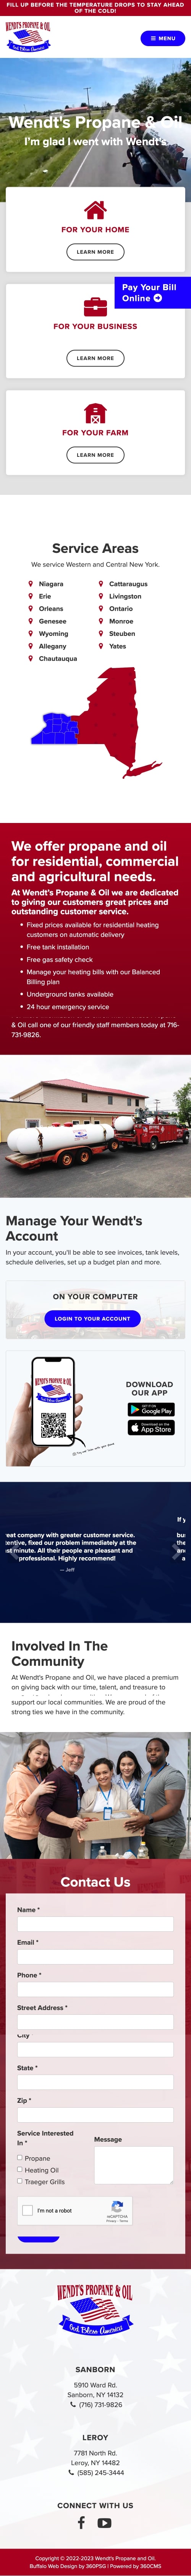 Wendt's Propane and Oil - Mobile